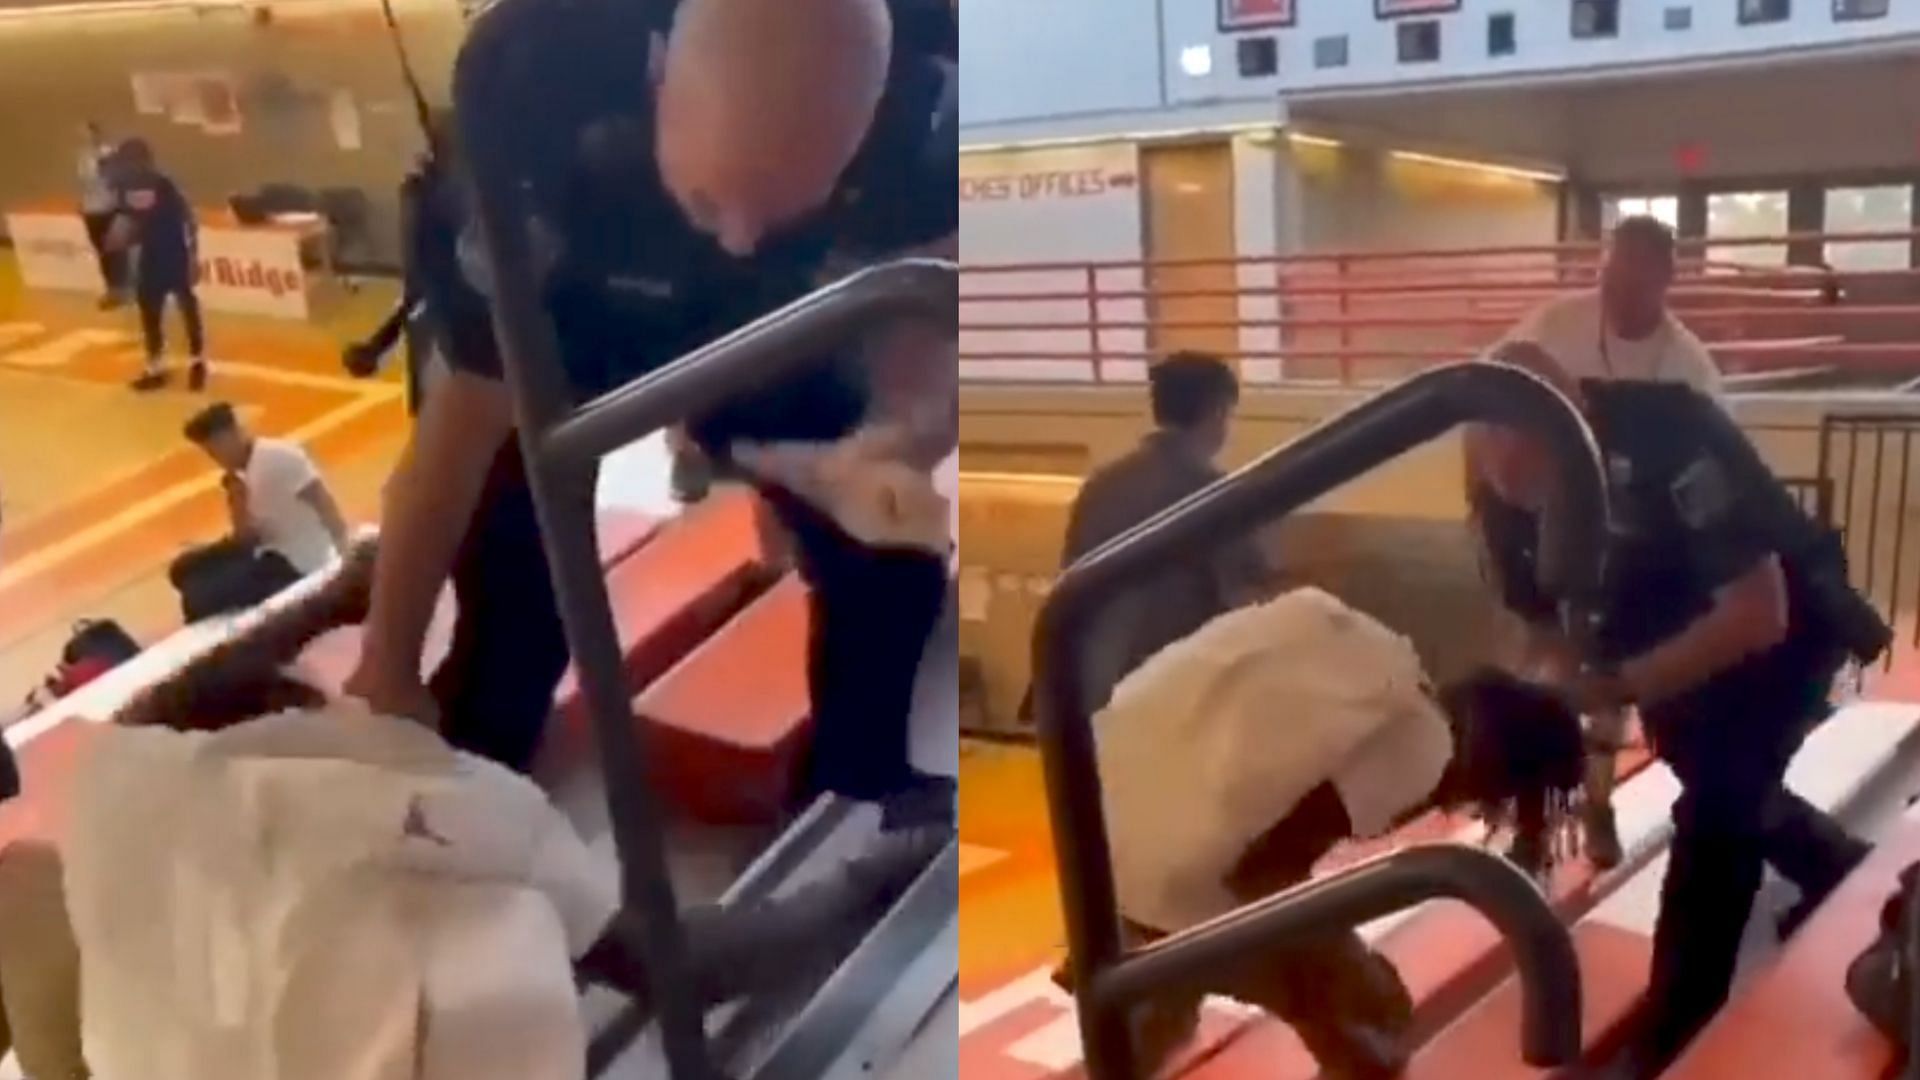 A high school student was brutally arrested in Tennessee for not playing kickball (Images via Chattanooga NAACP) 